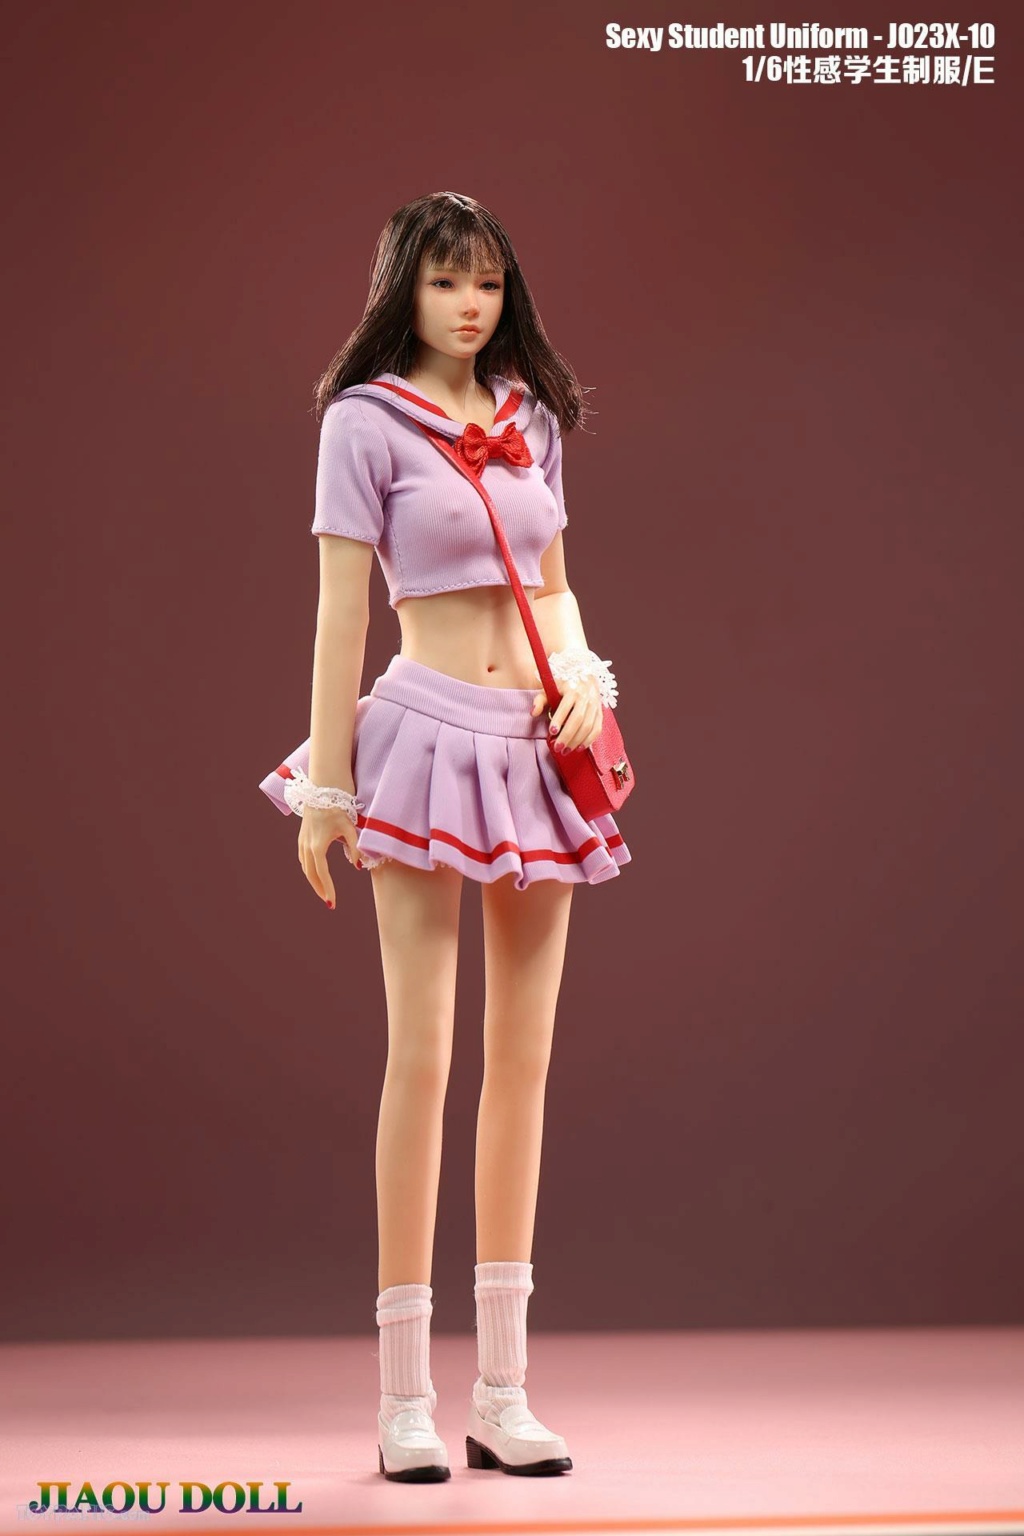 NEW PRODUCT: Jiaou Doll: 1/6 Sexy Student Uniform (7 color options) (JO23X-10A-G) (NSFW) 20920235